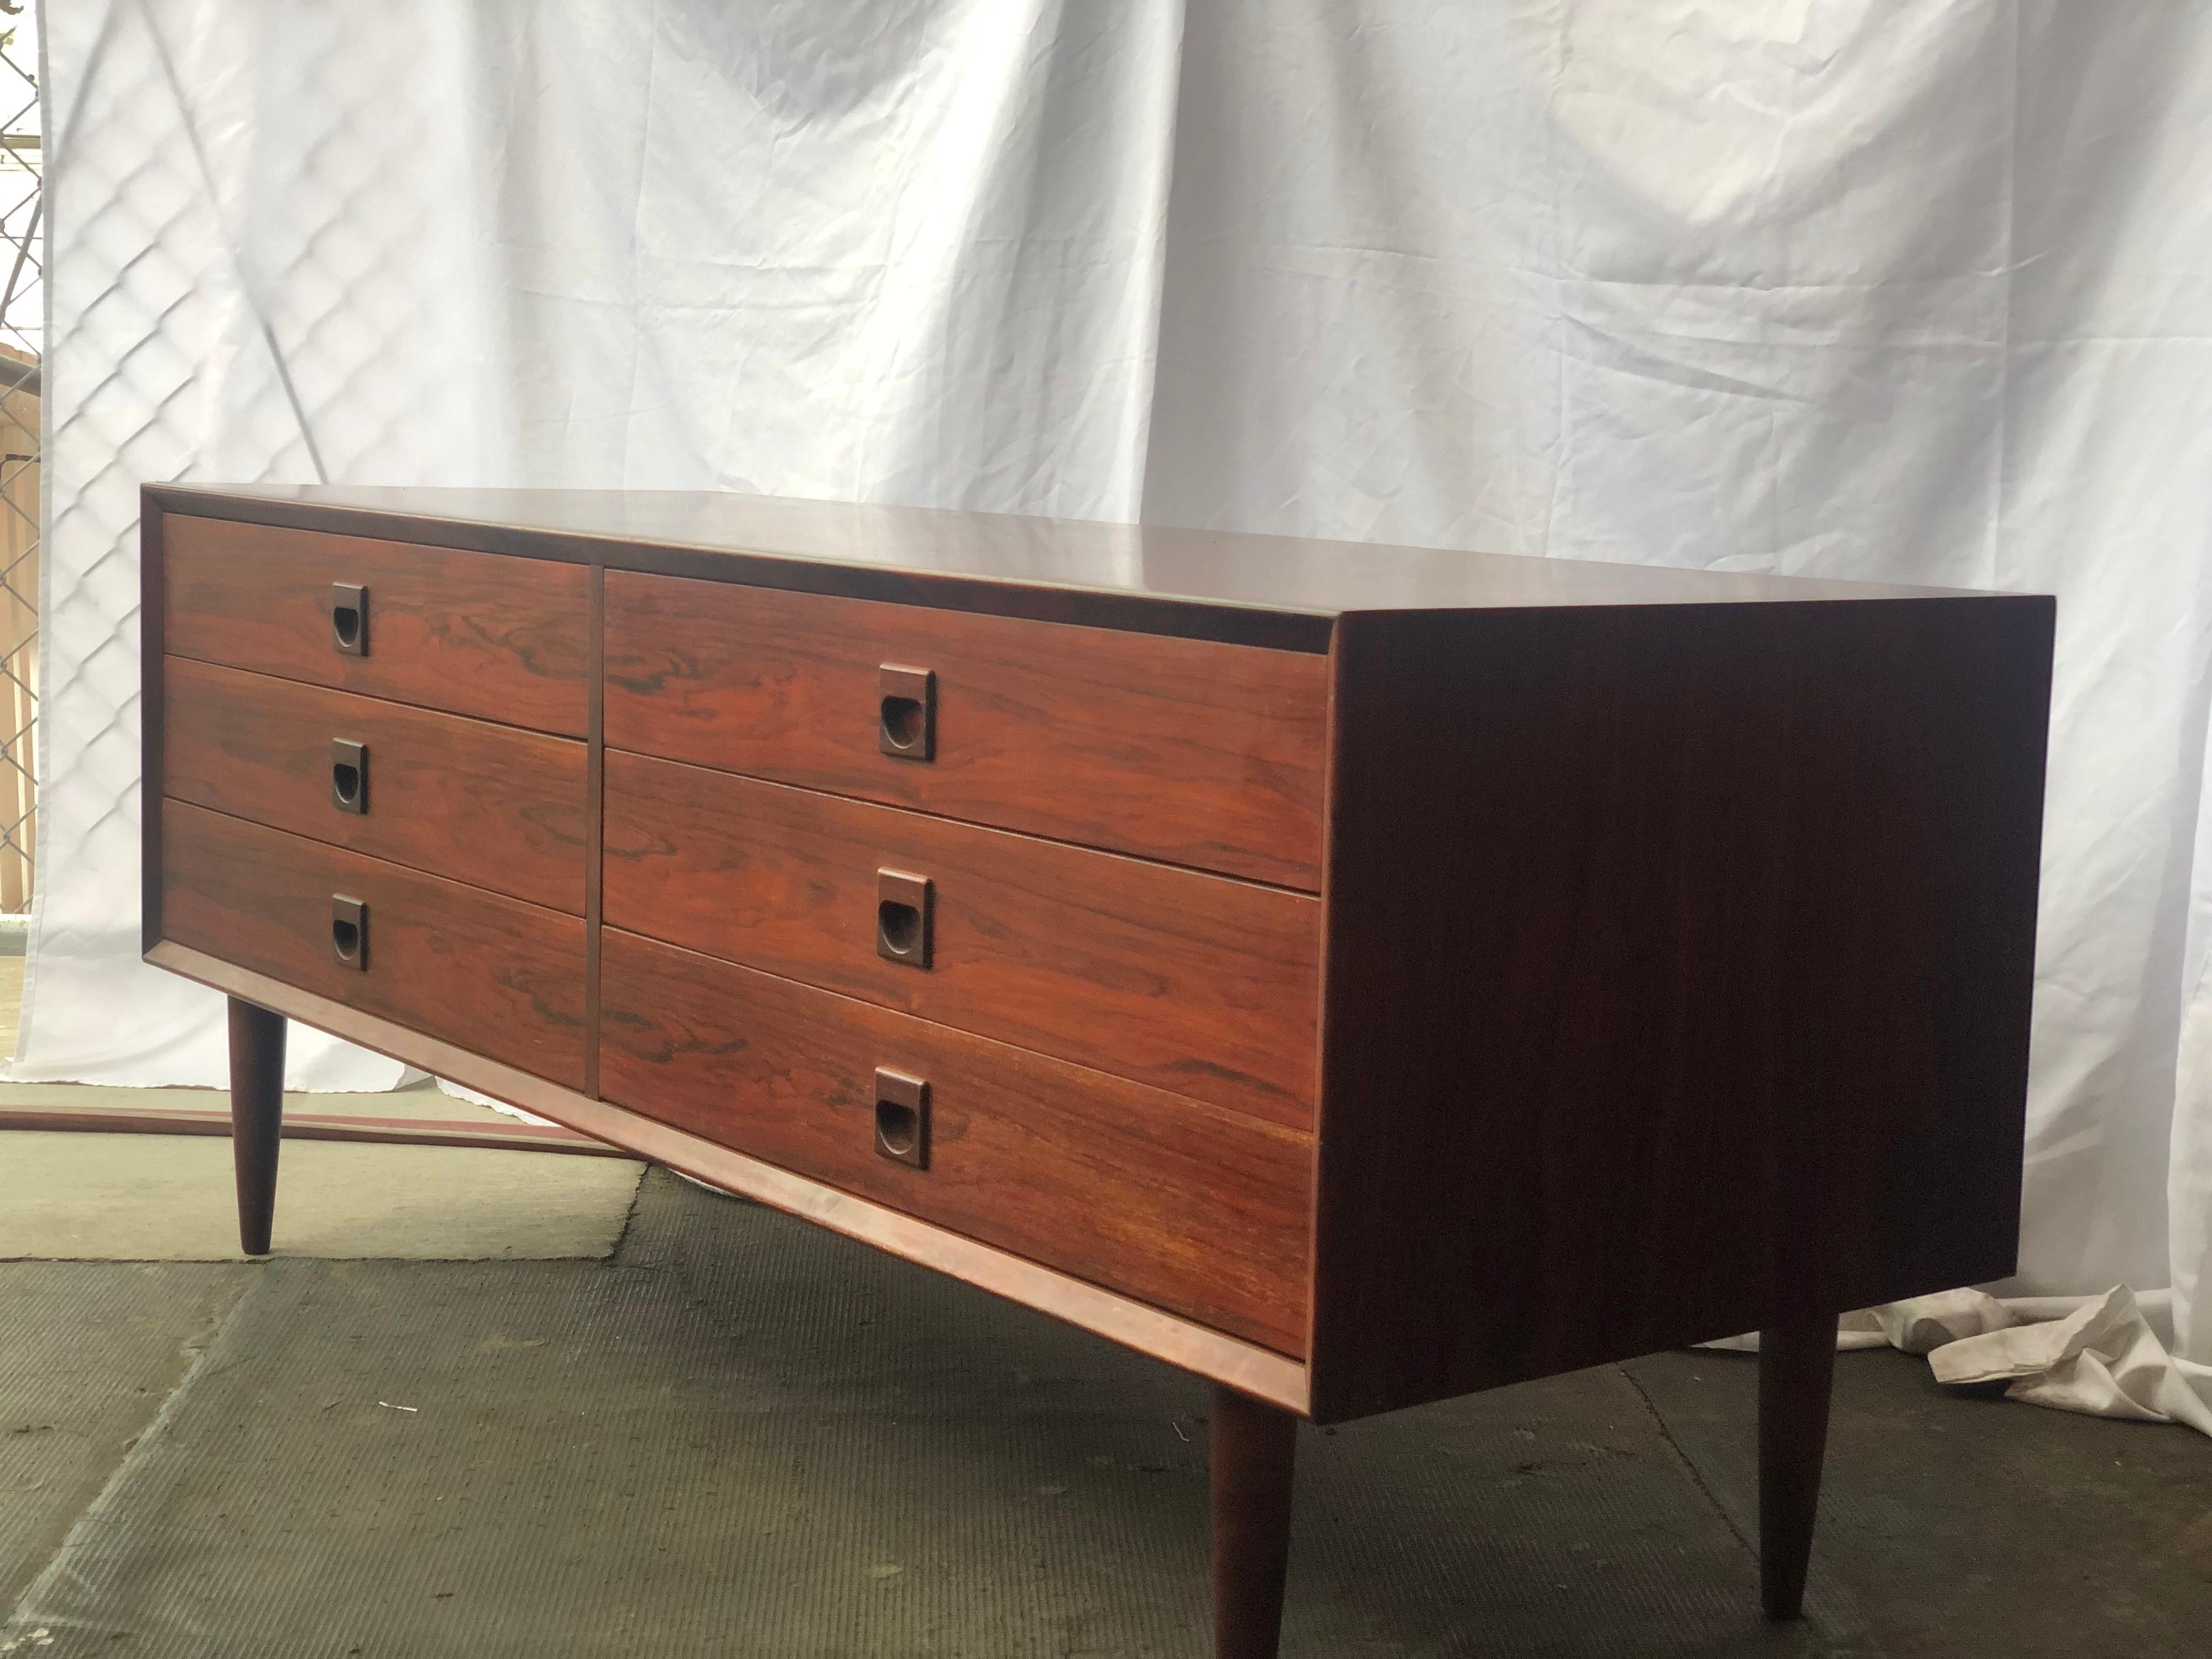 Beautiful short, dark rosewood sideboard with lovely wide drawers and square, inset handles. Good vintage condition.